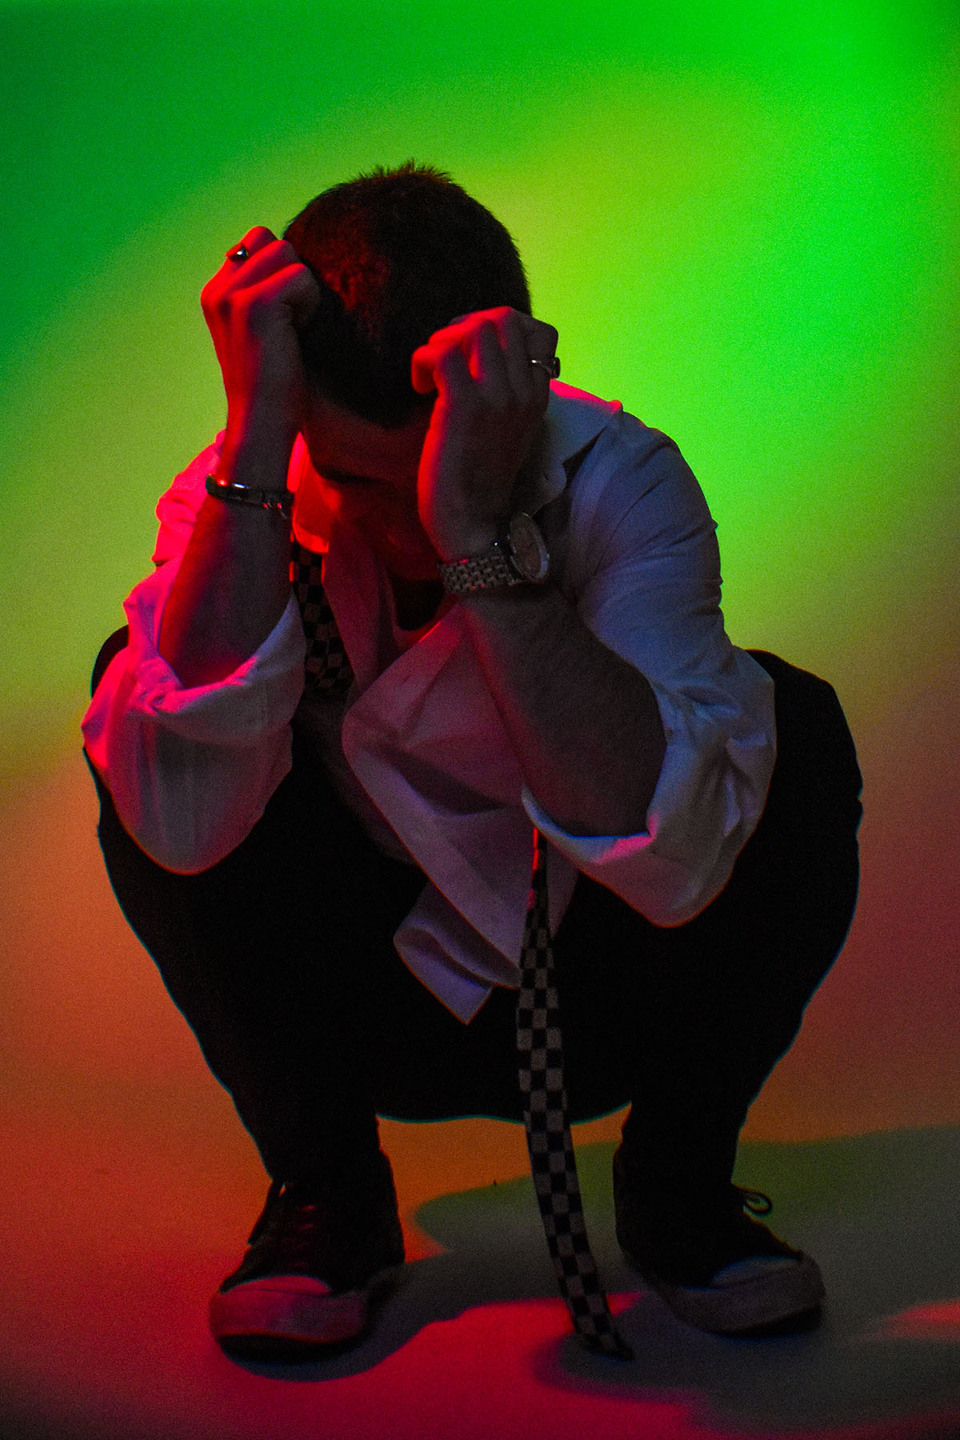 Young person crouched with hands in front of their head bathed in a green and orange light